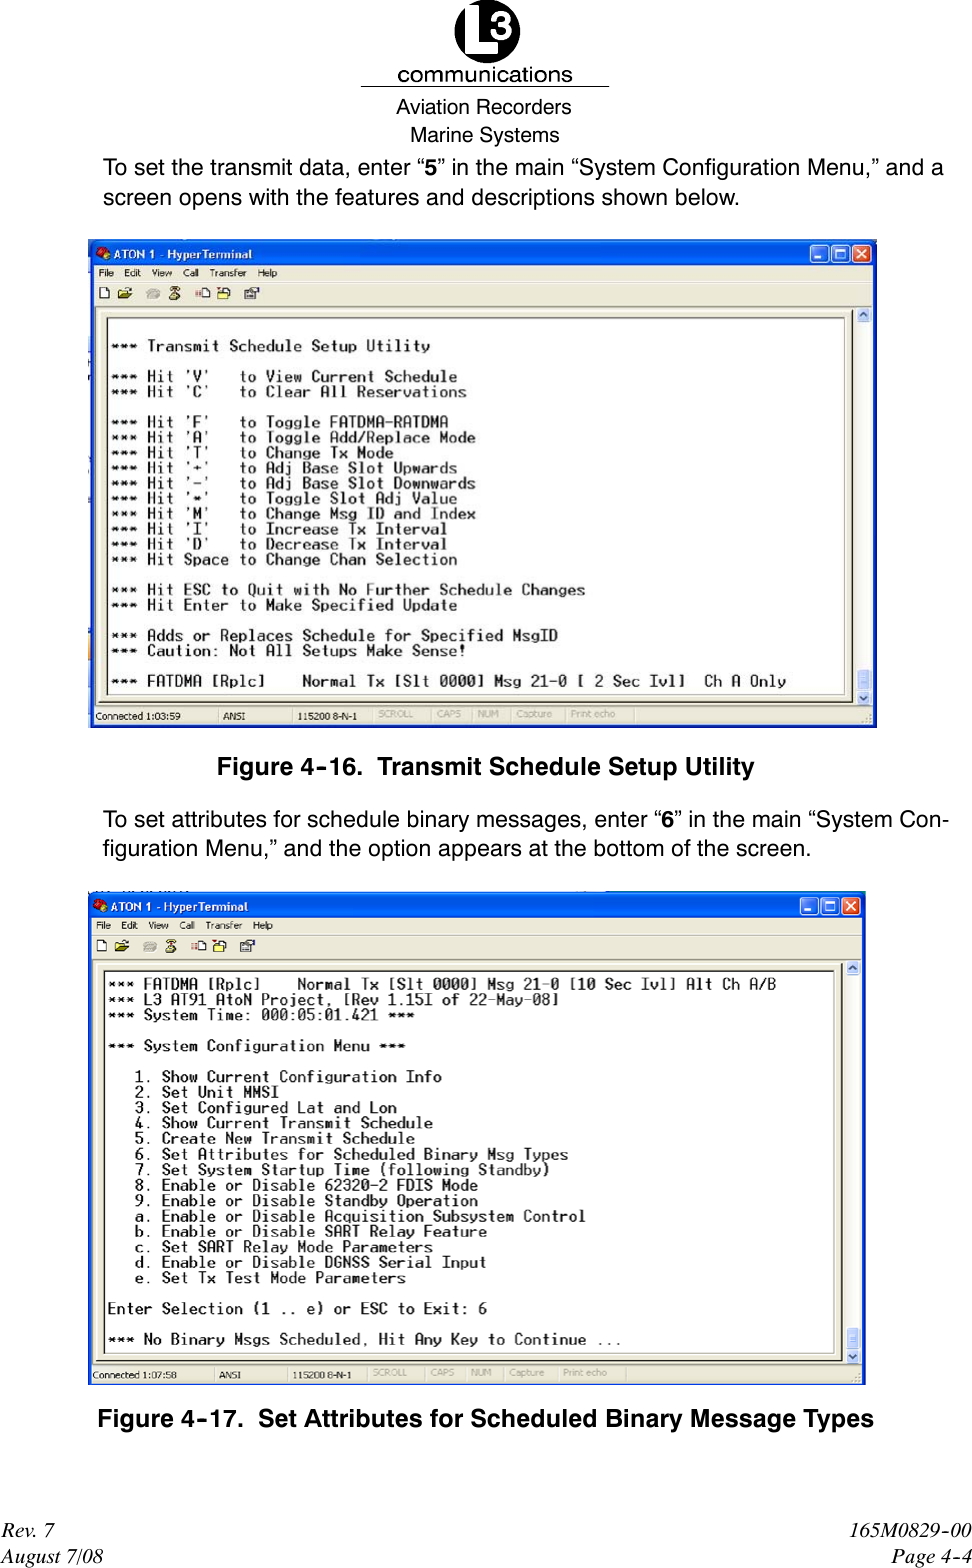 Marine SystemsAviation RecordersRev. 7August 7/08165M0829--00Page 4--4To set the transmit data, enter “5” in the main “System Configuration Menu,” and ascreen opens with the features and descriptions shown below.Figure 4--16. Transmit Schedule Setup UtilityTo set attributes for schedule binary messages, enter “6” in the main “System Con-figuration Menu,” and the option appears at the bottom of the screen.Figure 4--17. Set Attributes for Scheduled Binary Message Types